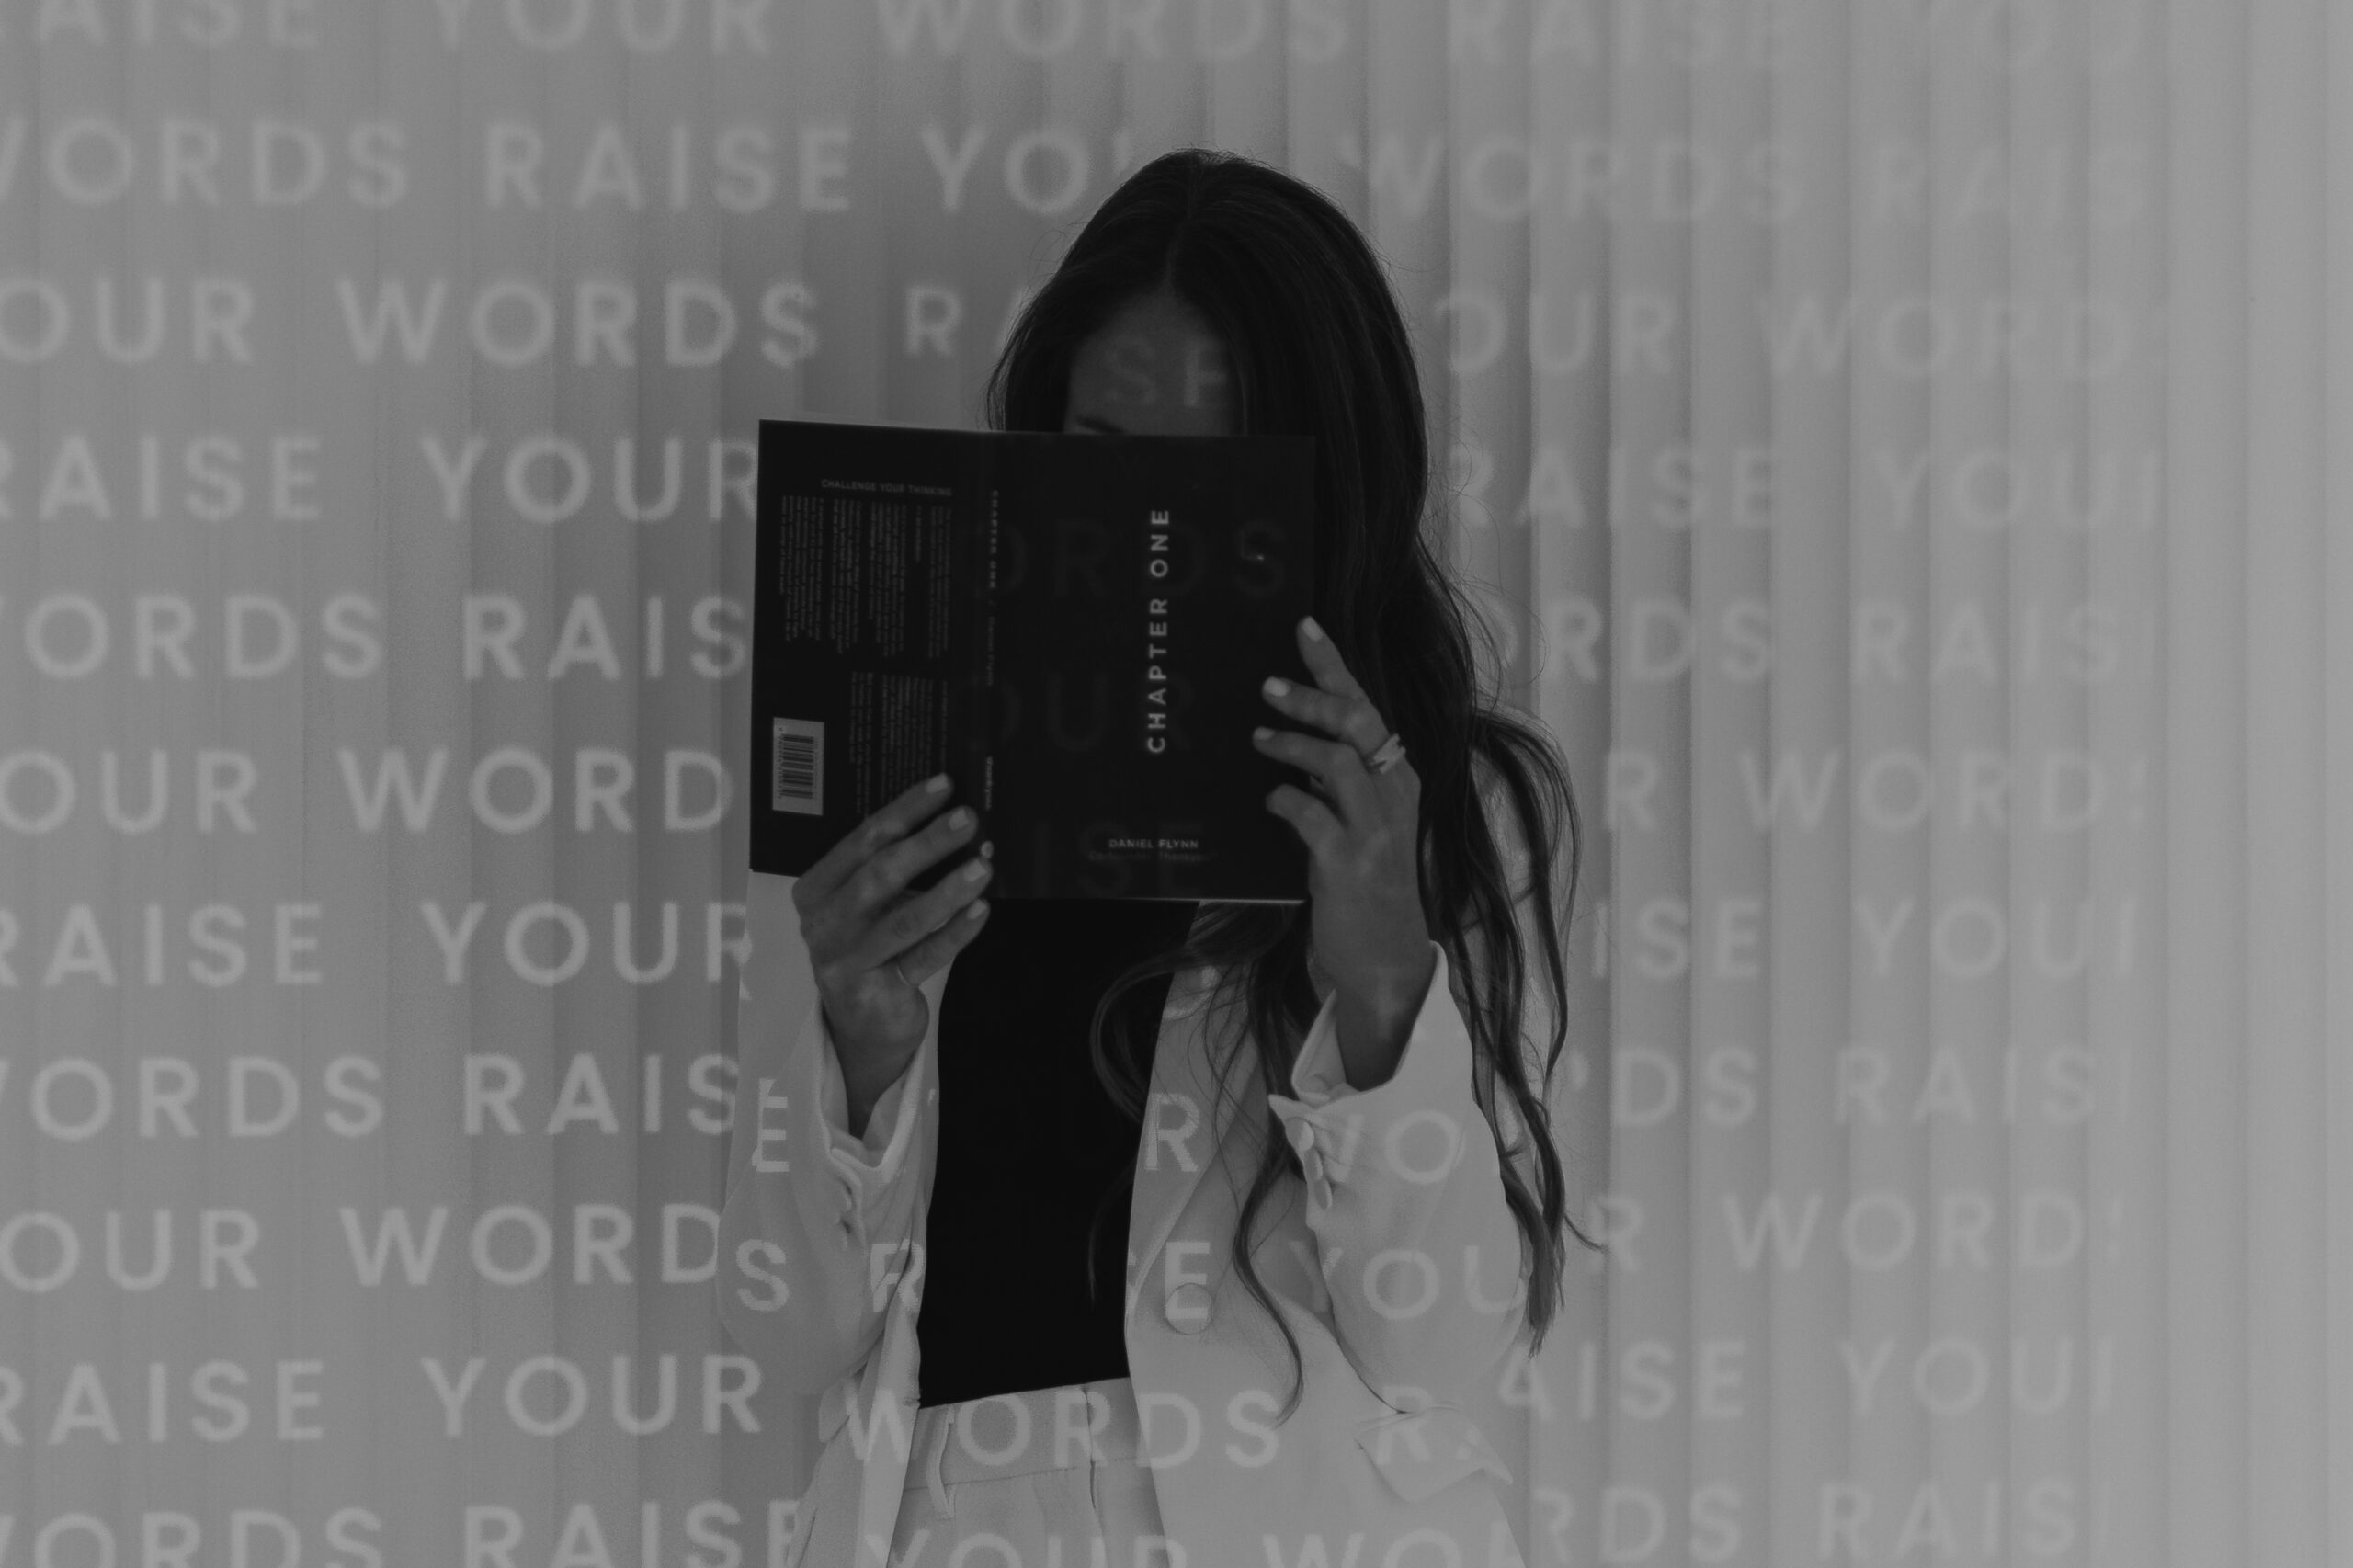 Woman reading a book against a background that says raise your words